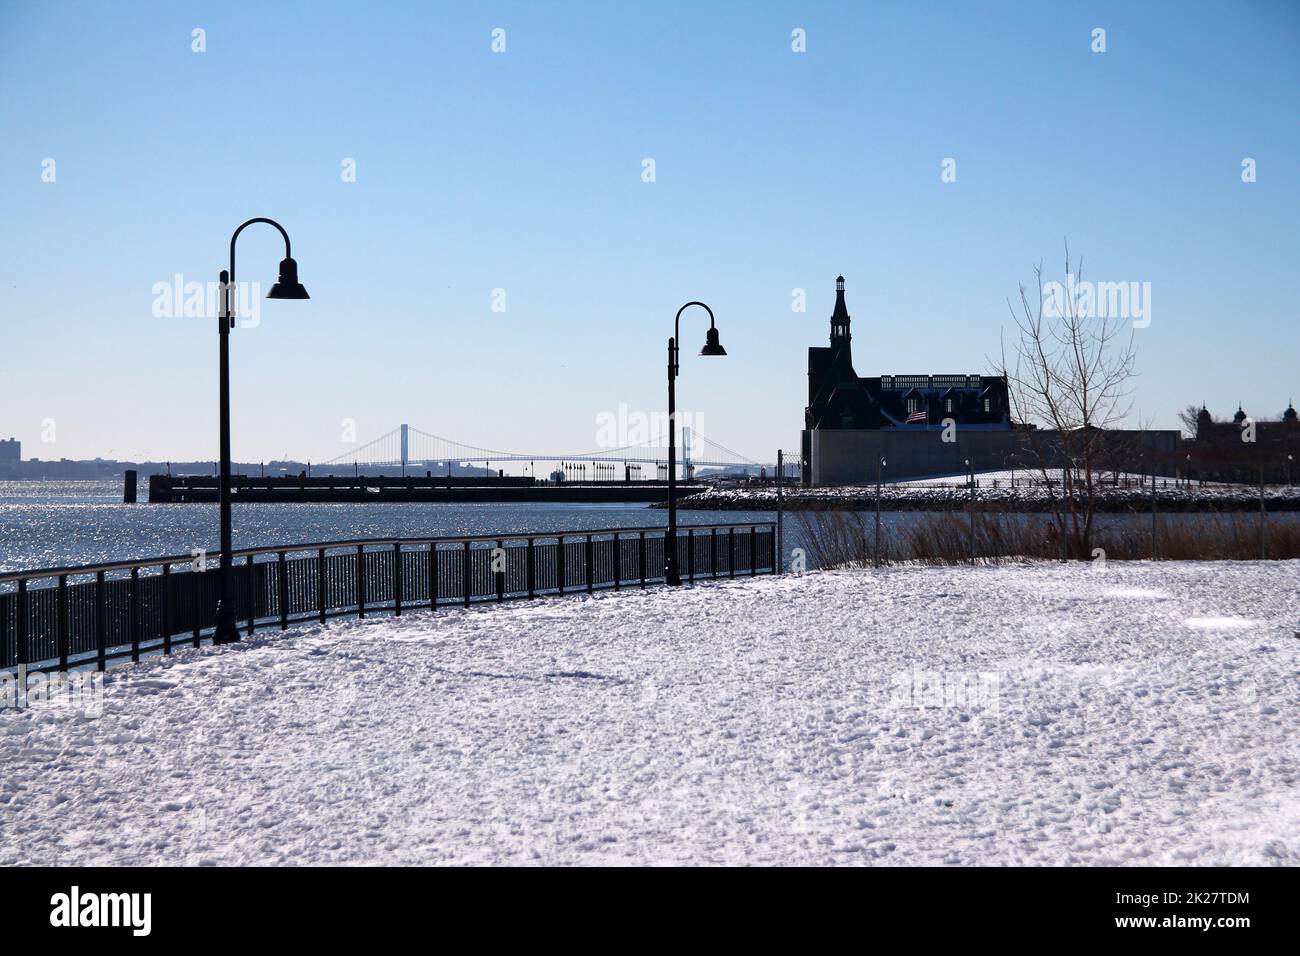 The Central Railroad of New Jersey Terminal and Verrazzano bridge with the snow Stock Photo